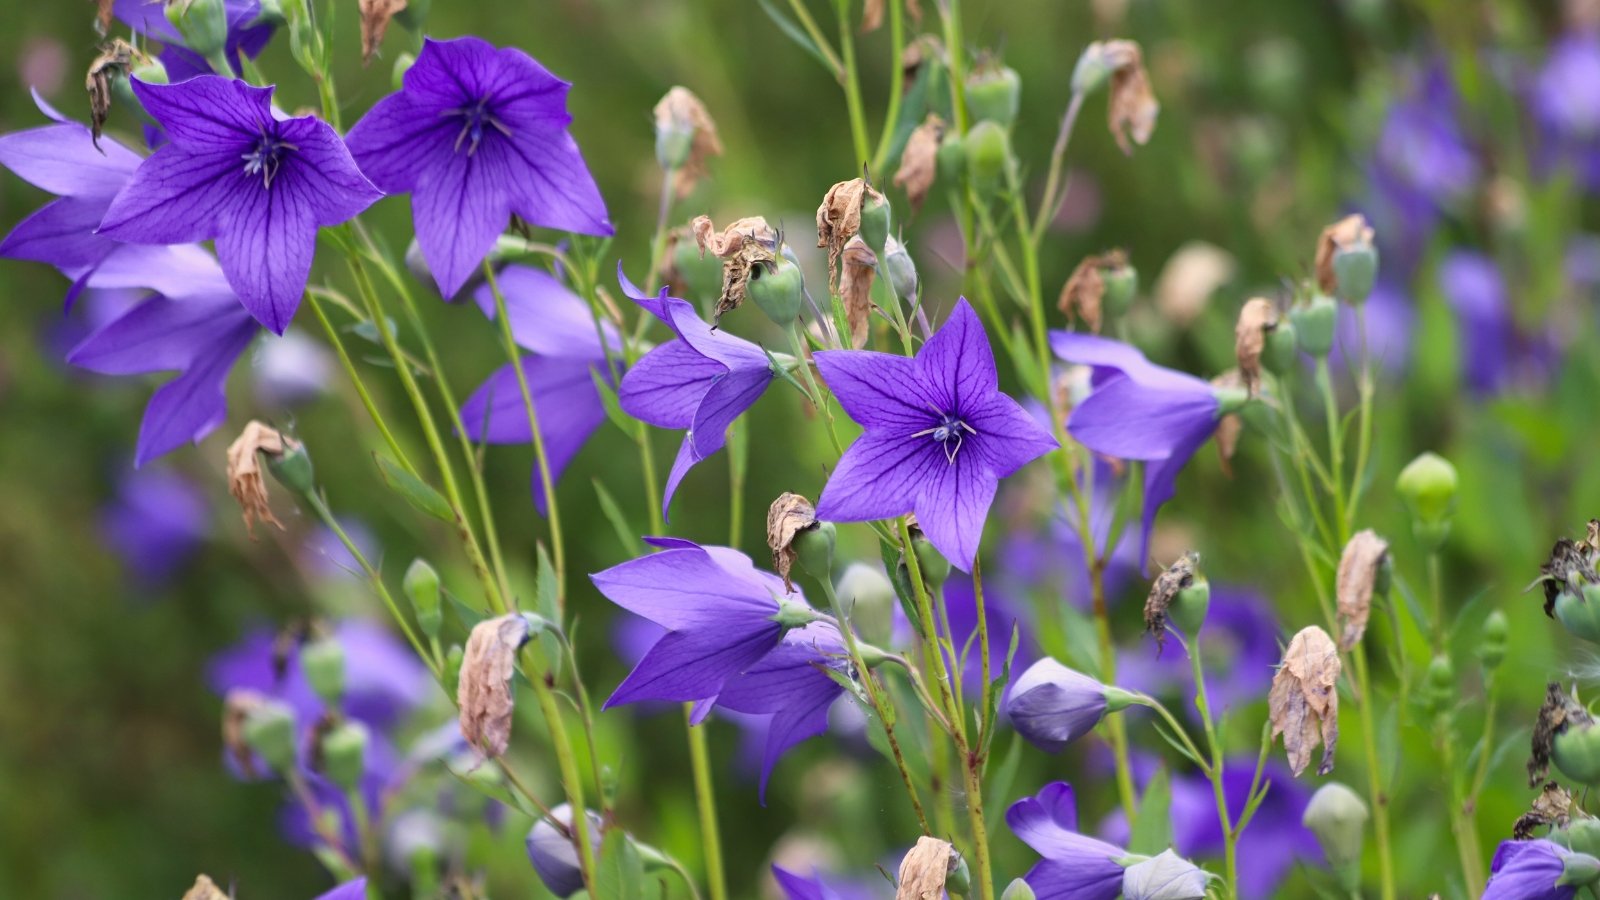 Platycodon grandiflorus showcases sturdy stems and broad, toothed leaves, producing large, balloon-shaped buds that open into star-shaped flowers in shades of blue.
